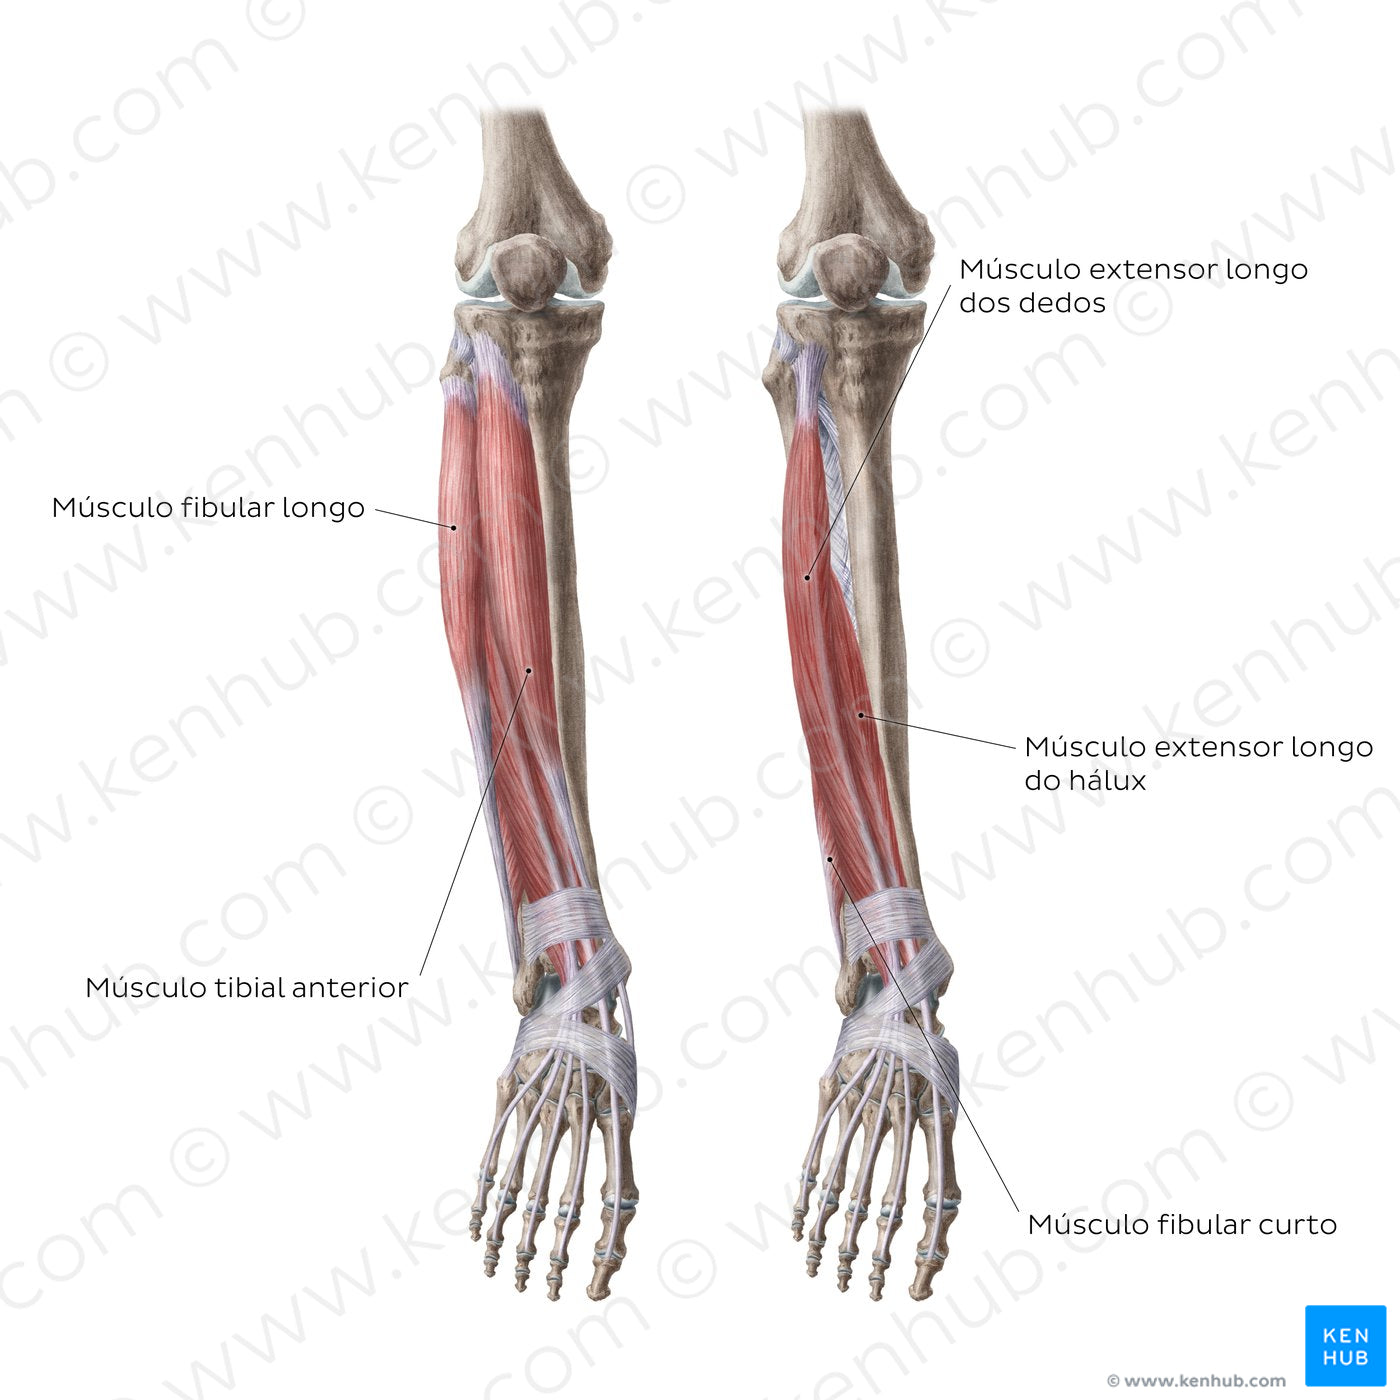 Muscles of the leg (Anterior view) (Portuguese)